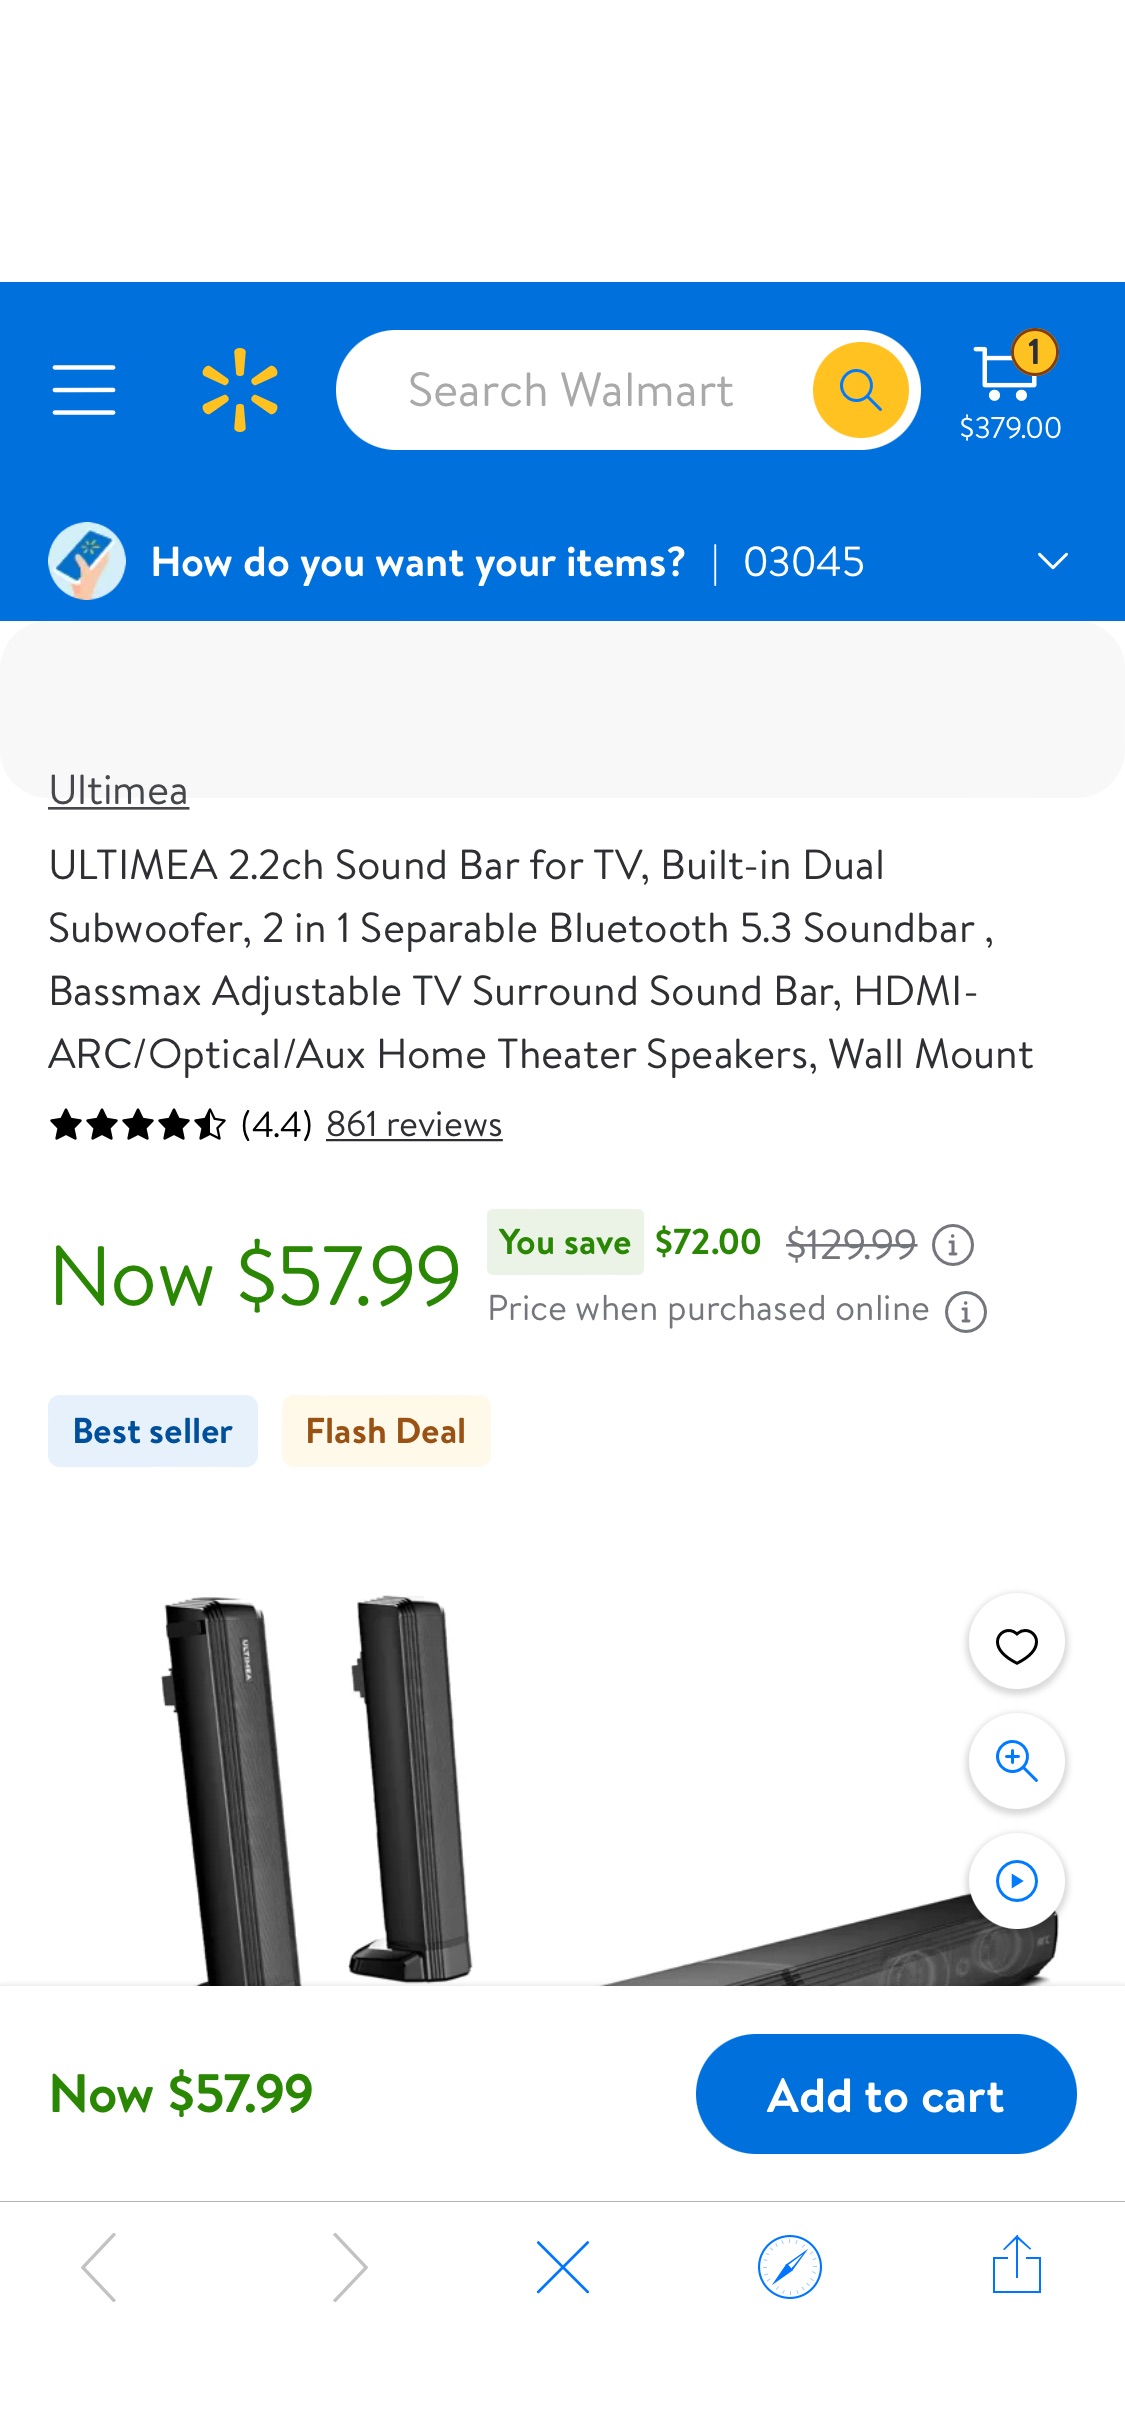 ULTIMEA 2.2ch Sound Bar for TV, Built-in Dual Subwoofer, 2 in 1 Separable Bluetooth 5.3 Soundbar , Bassmax Adjustable TV Surround Sound Bar, HDMI-ARC/Optical/Aux Home Theater Speakers, Wall Mount - Wa